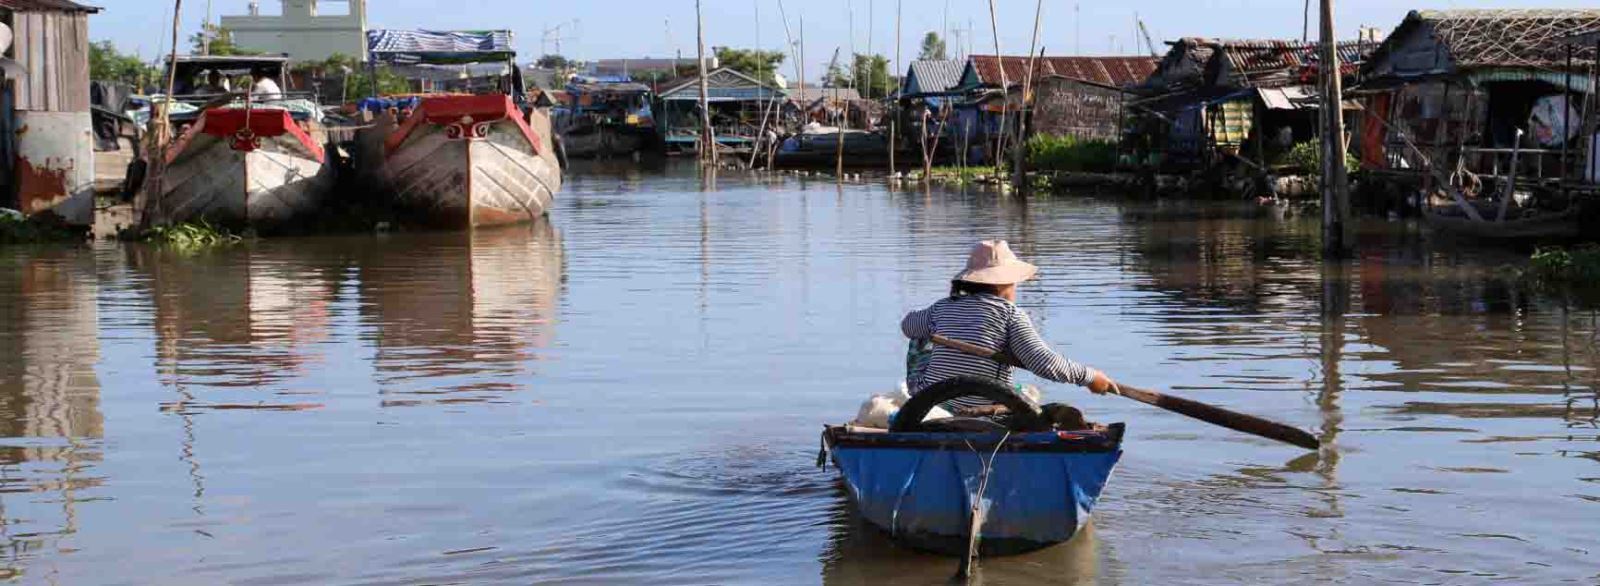 Floating villages on the Hau Giang River